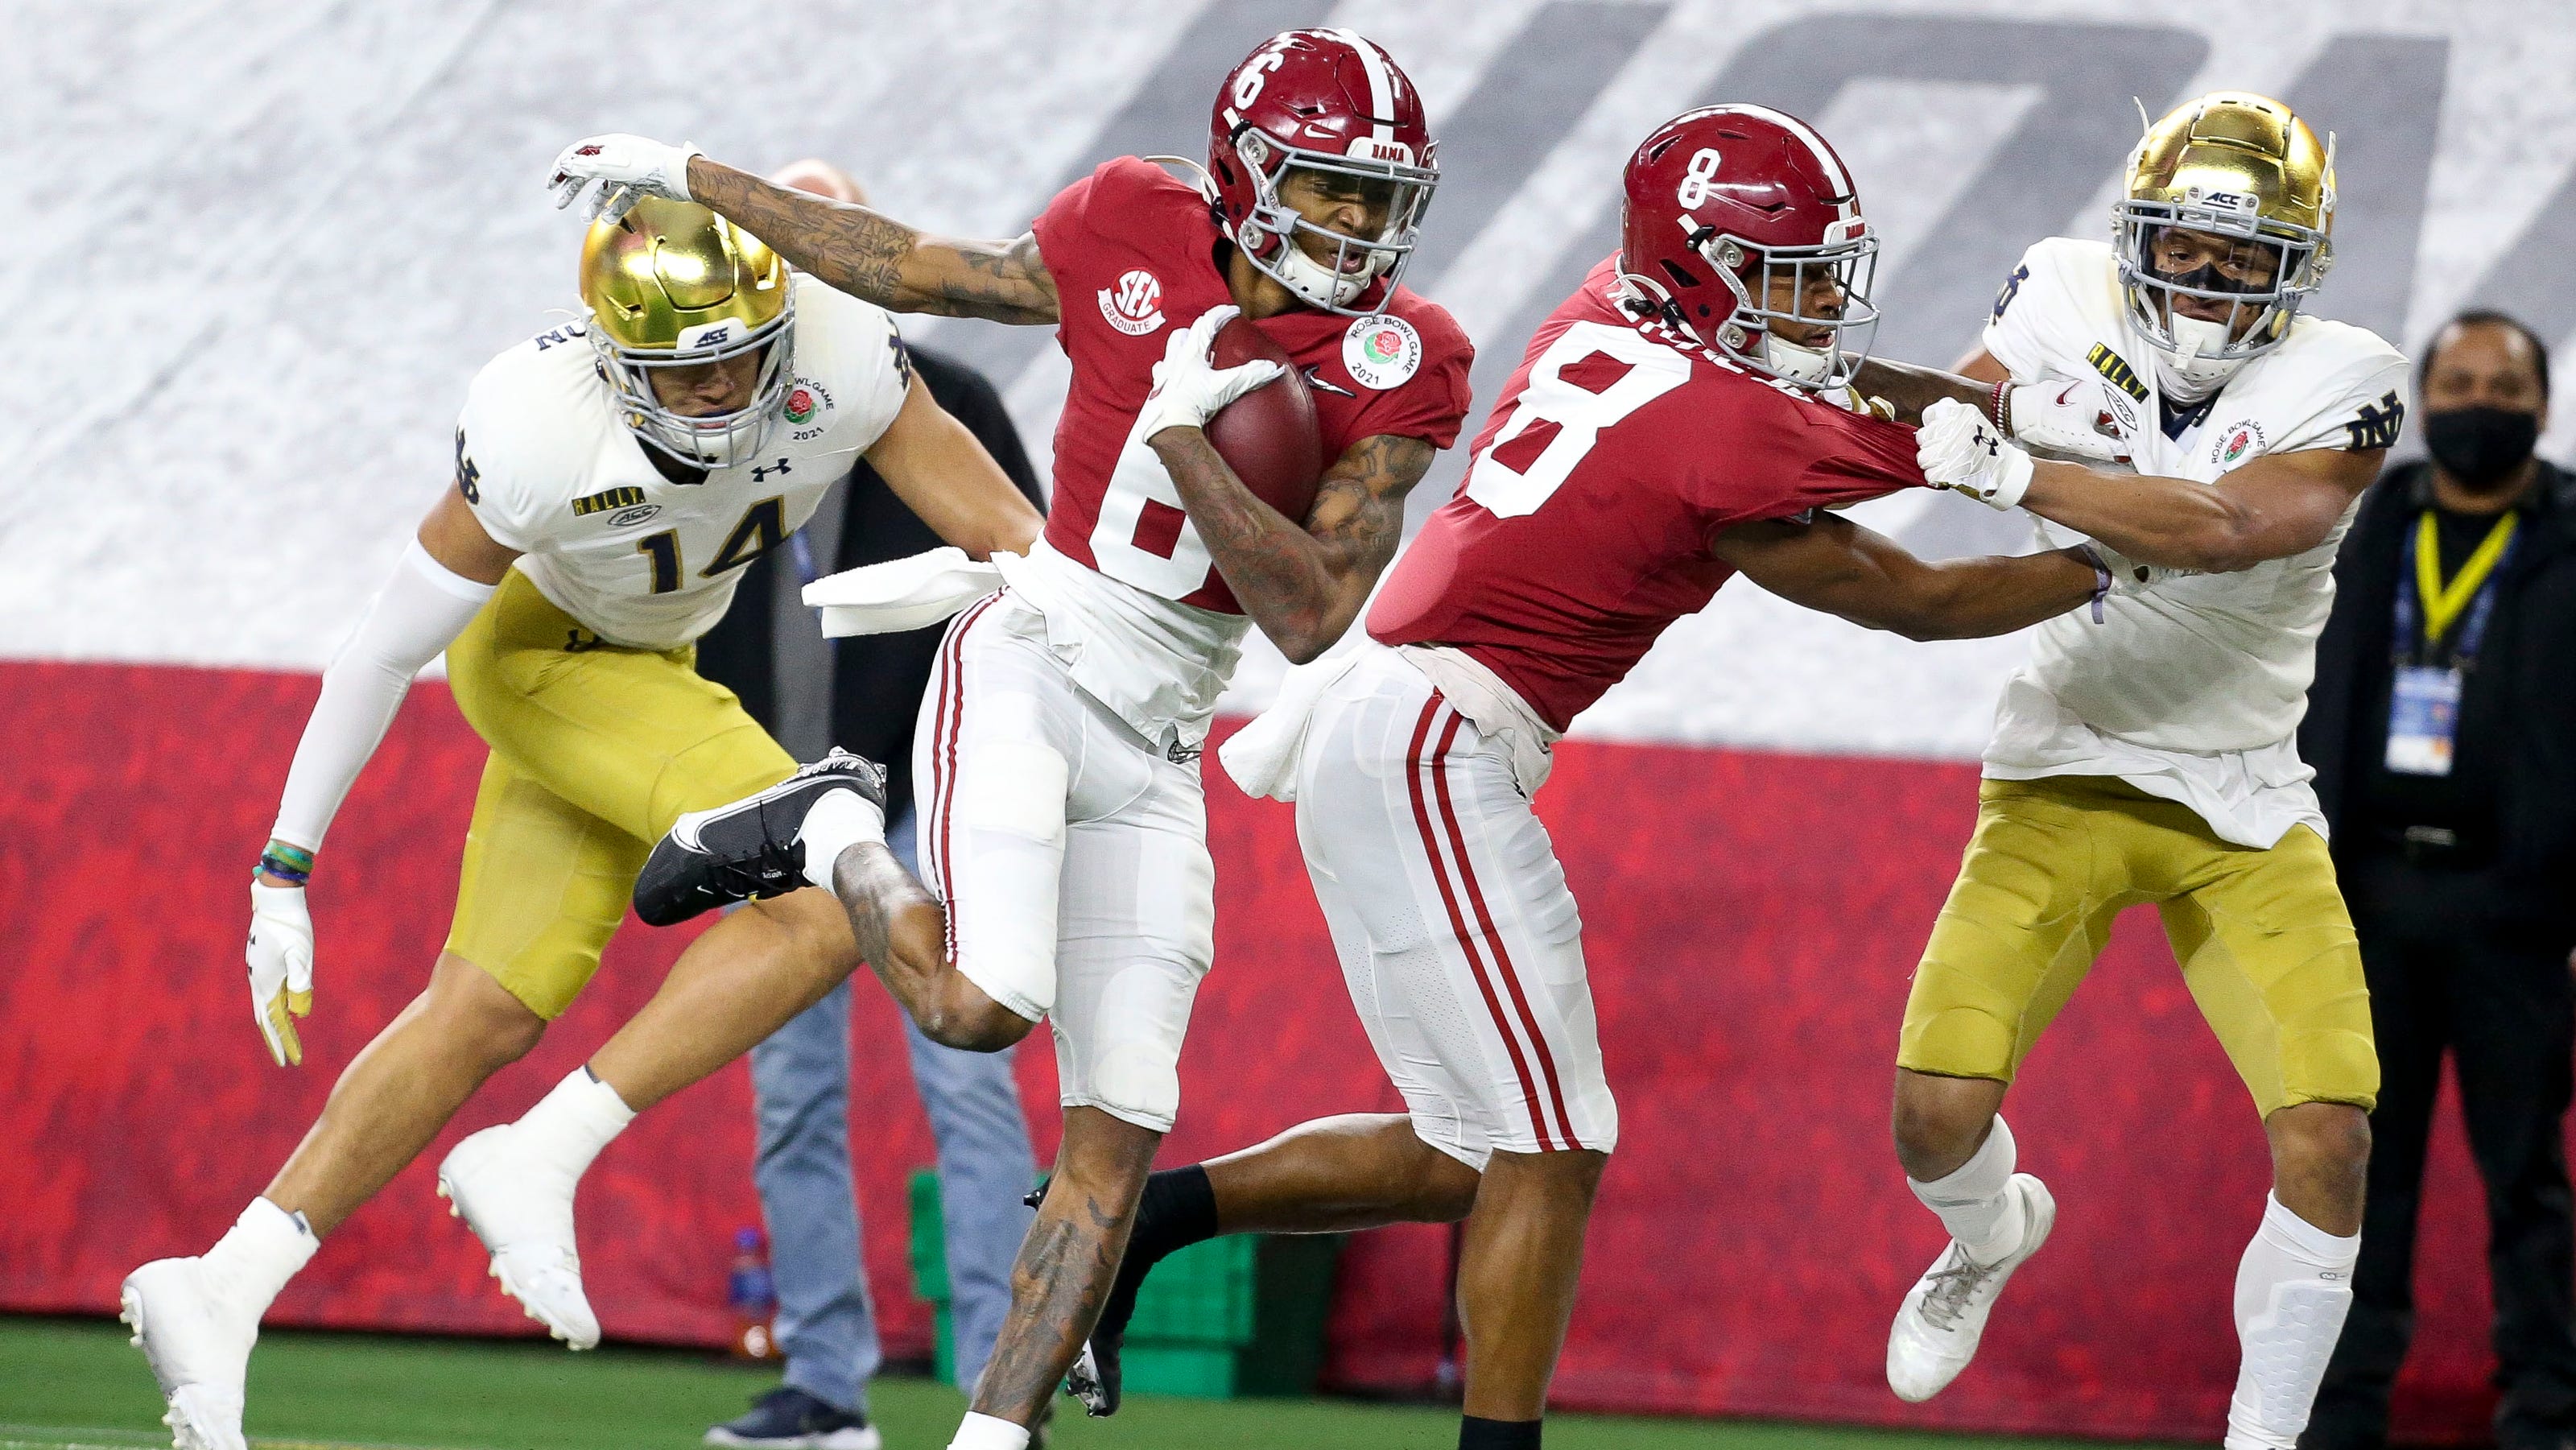 Alabama rolls Notre Dame in college football semifinal at Rose Bowl